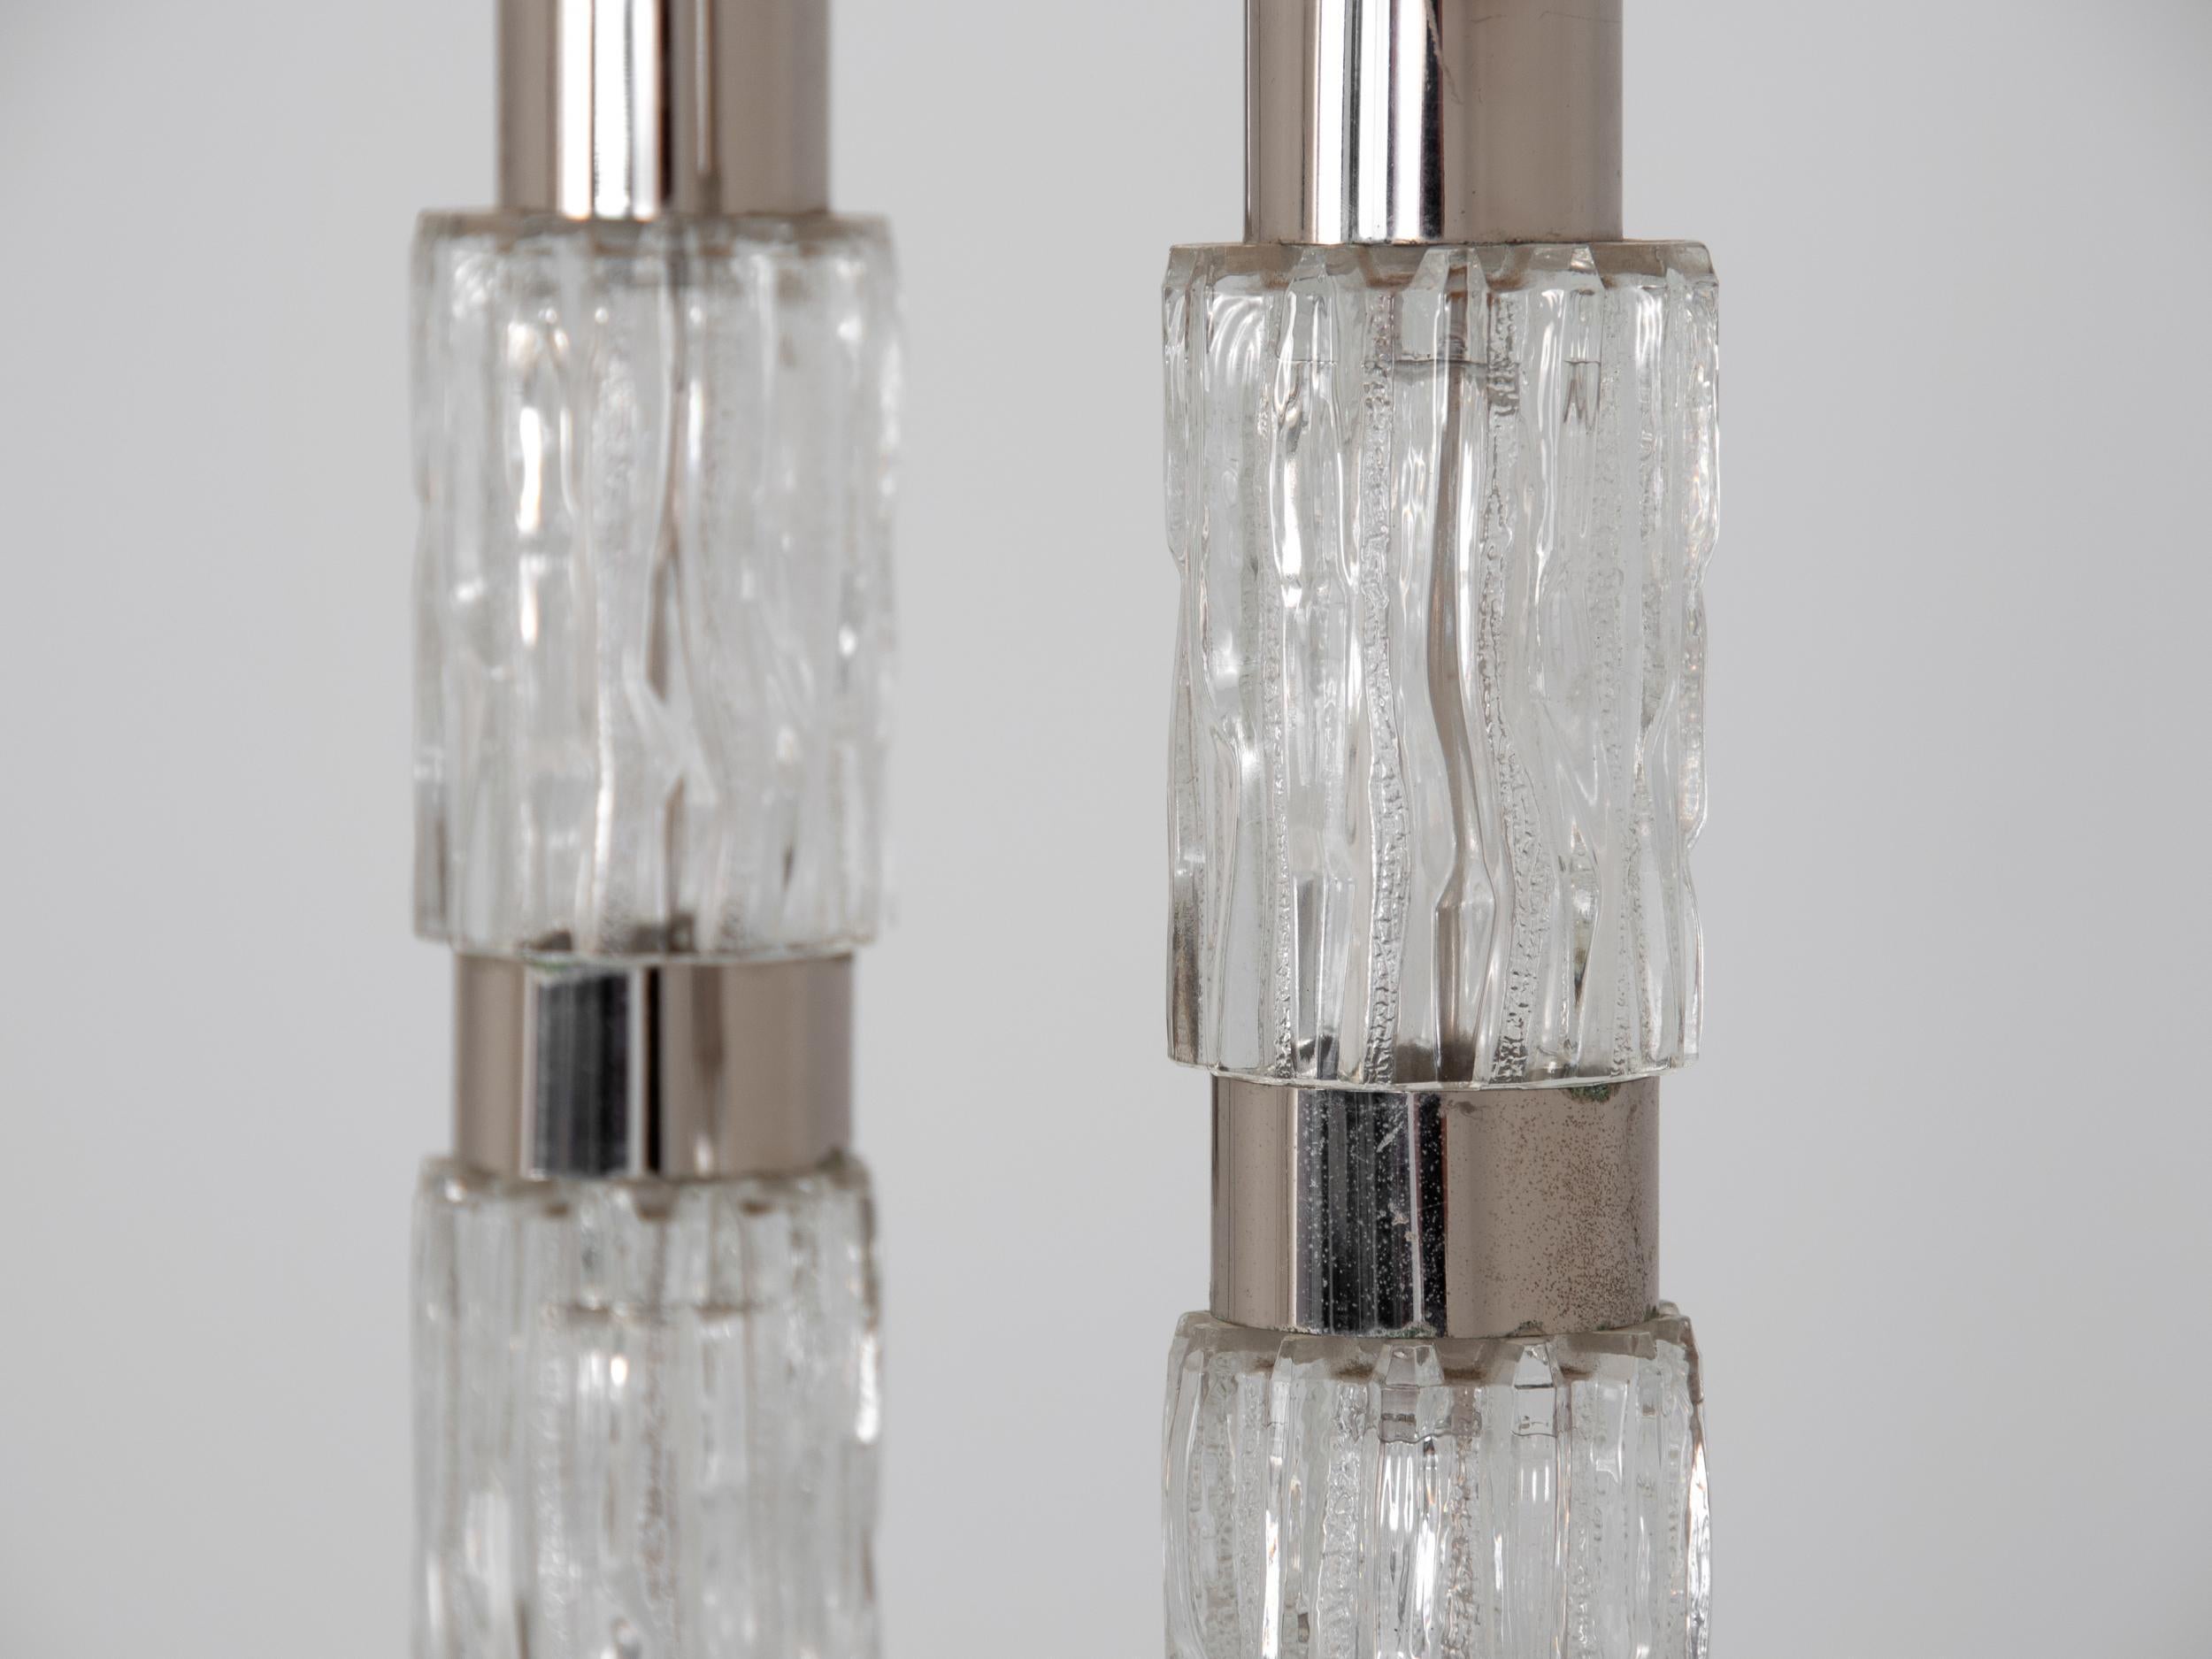 Pair of 1960s Italian Lucite column side or table lamps with modern reflective shades. Made of Lucite and chrome these have been rewired for the US.